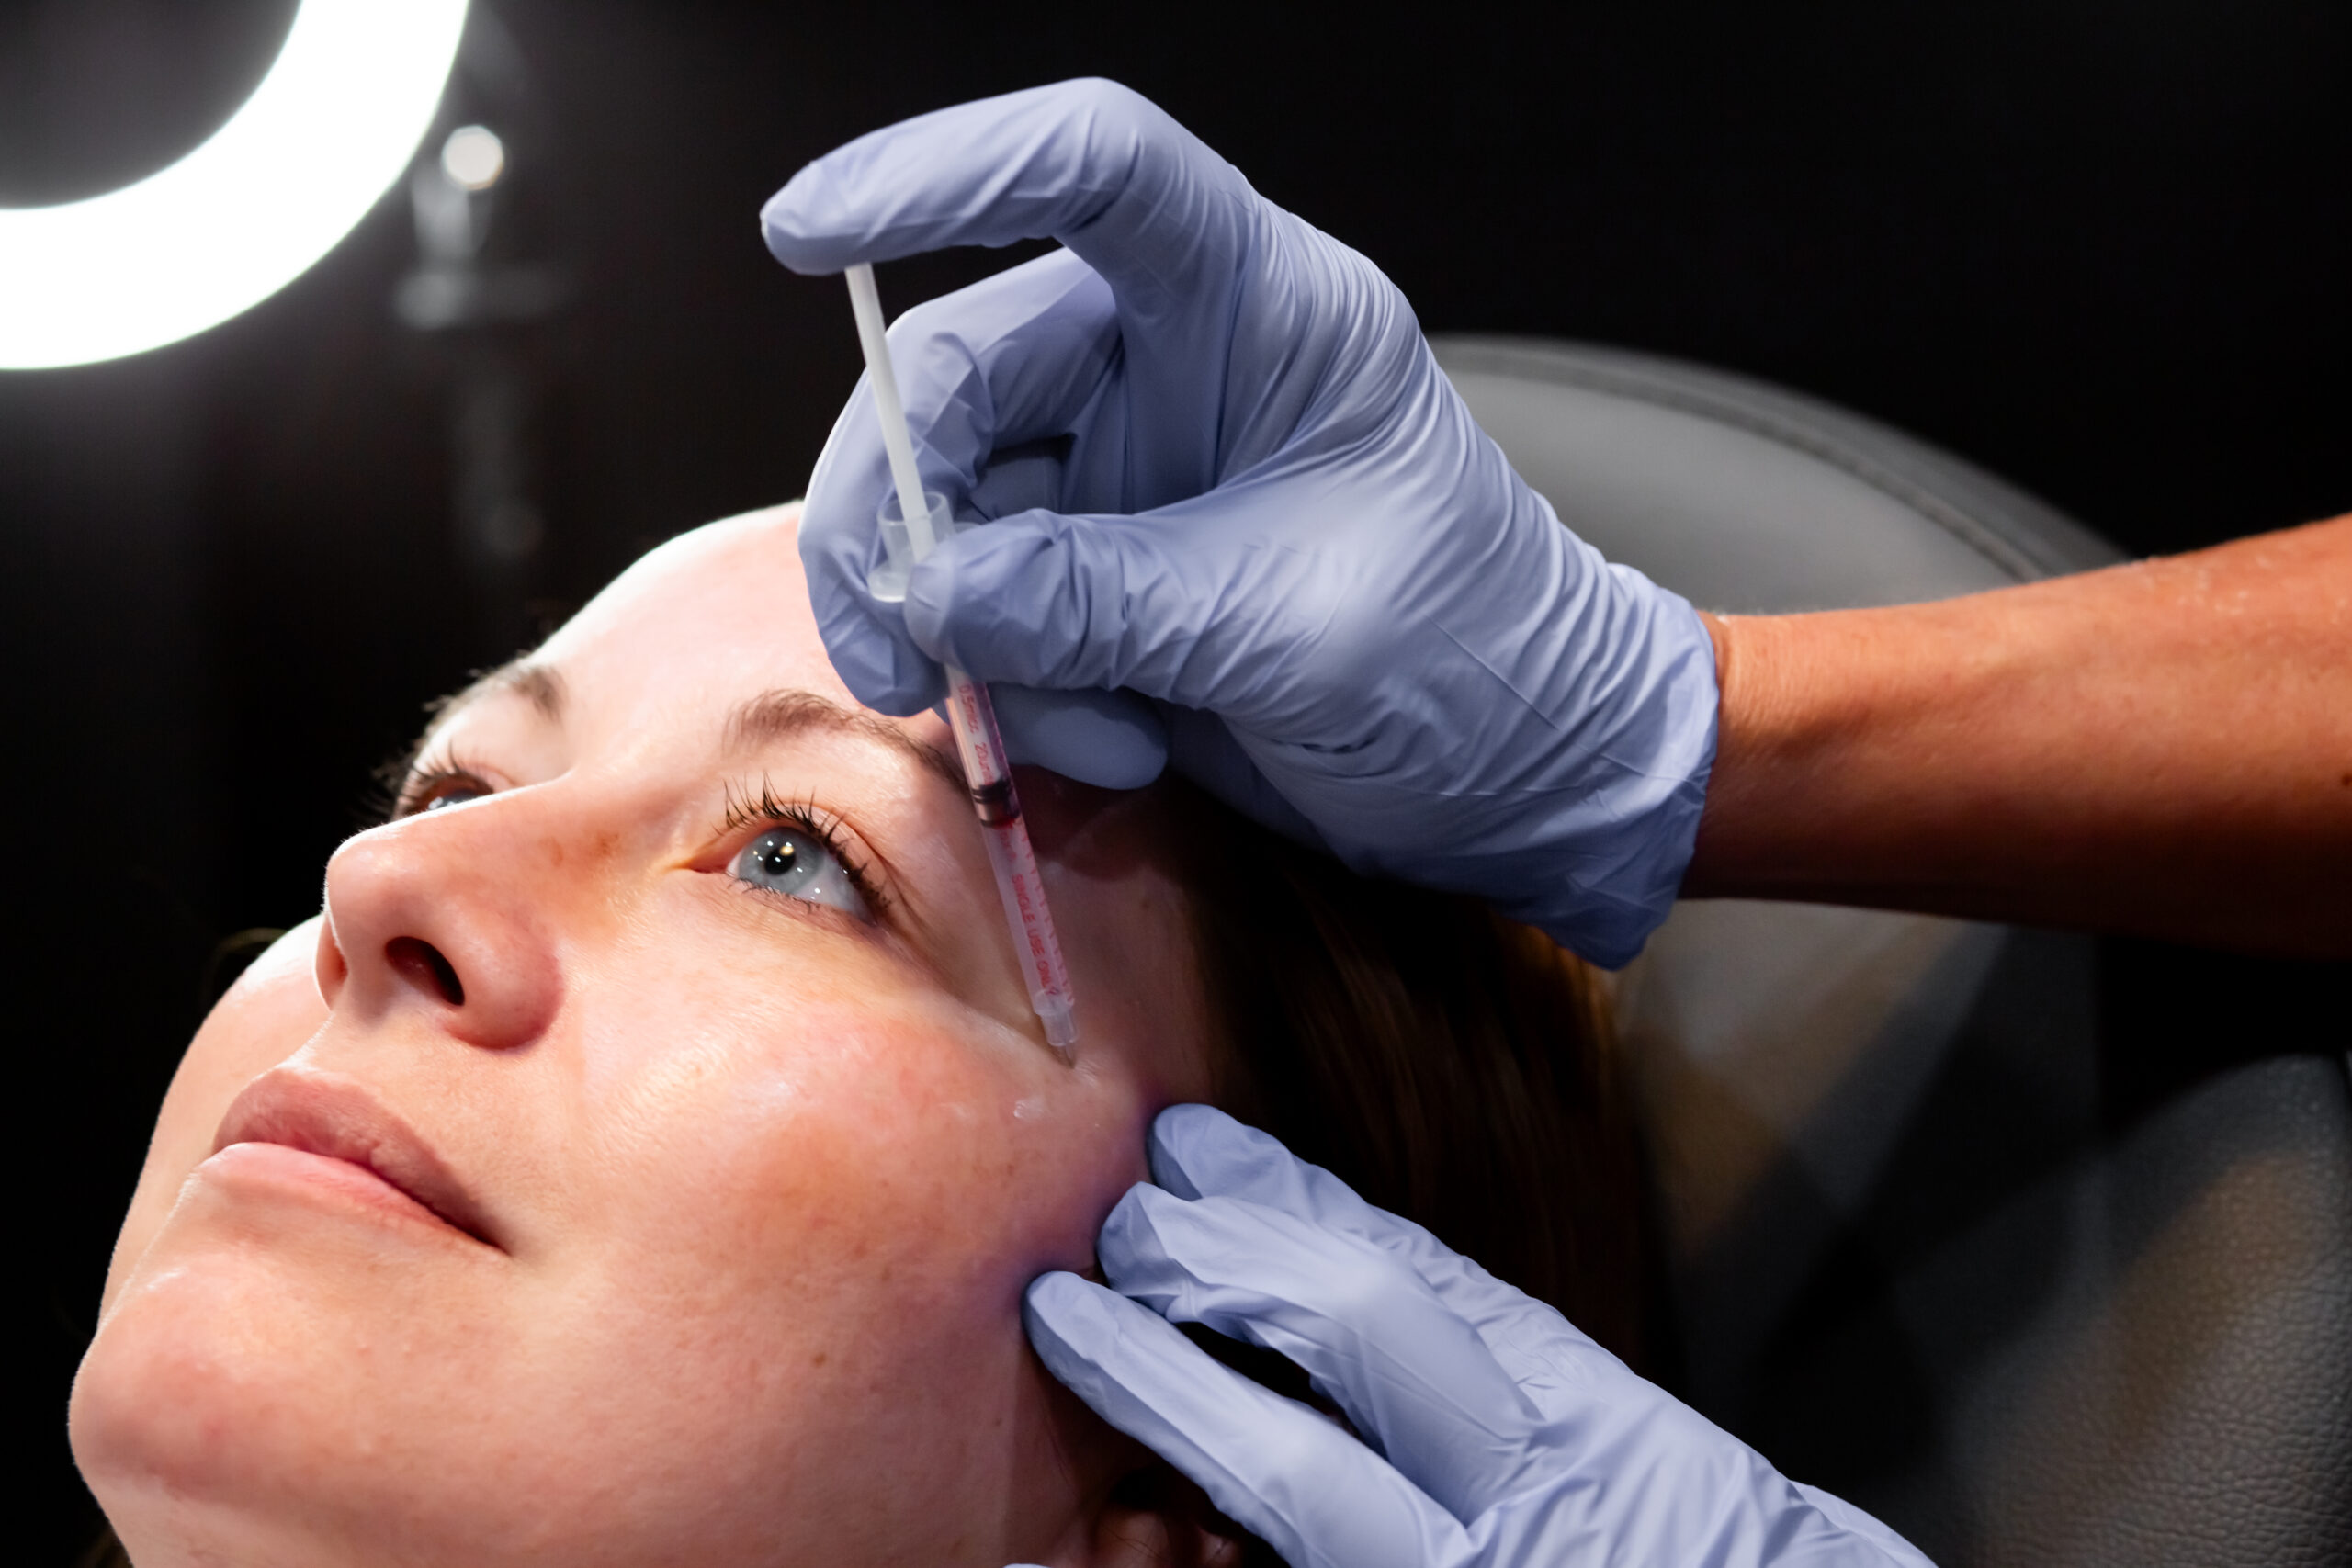 Receive the best Botox and injectables from Master Injector Jeanne Slusser located in downtown London, Kentucky.